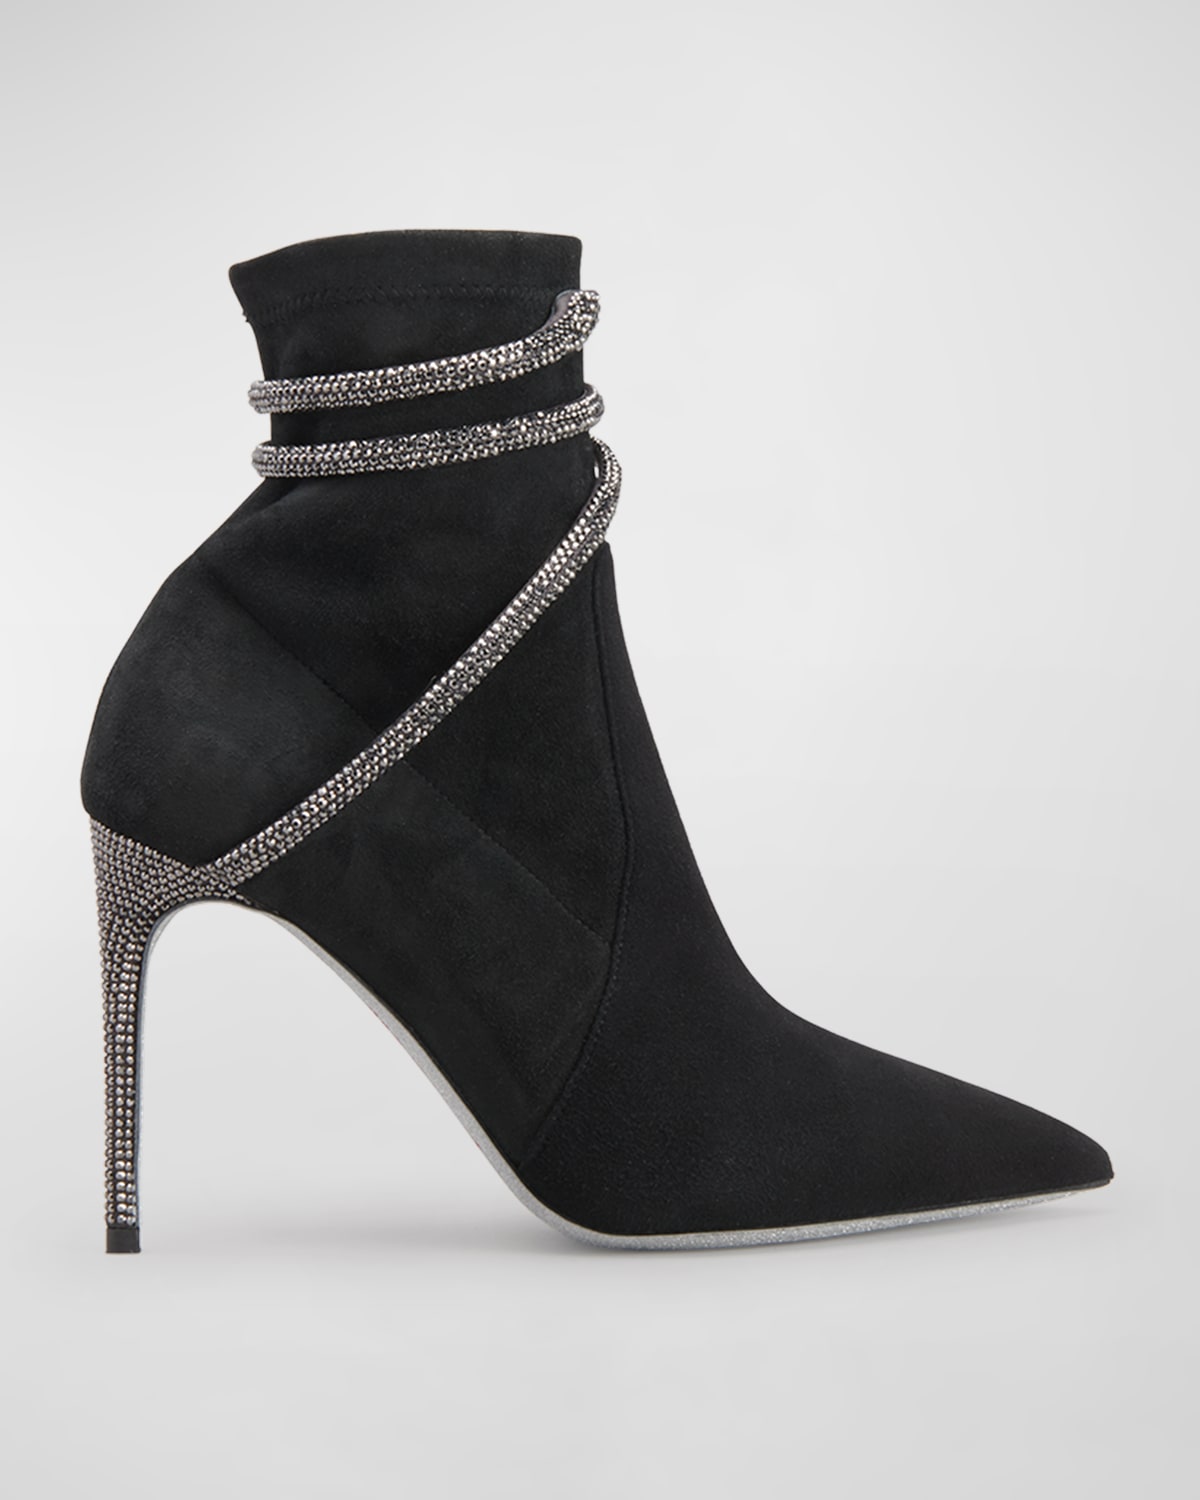 René Caovilla Suede Strass Snake Ankle Boots In Black